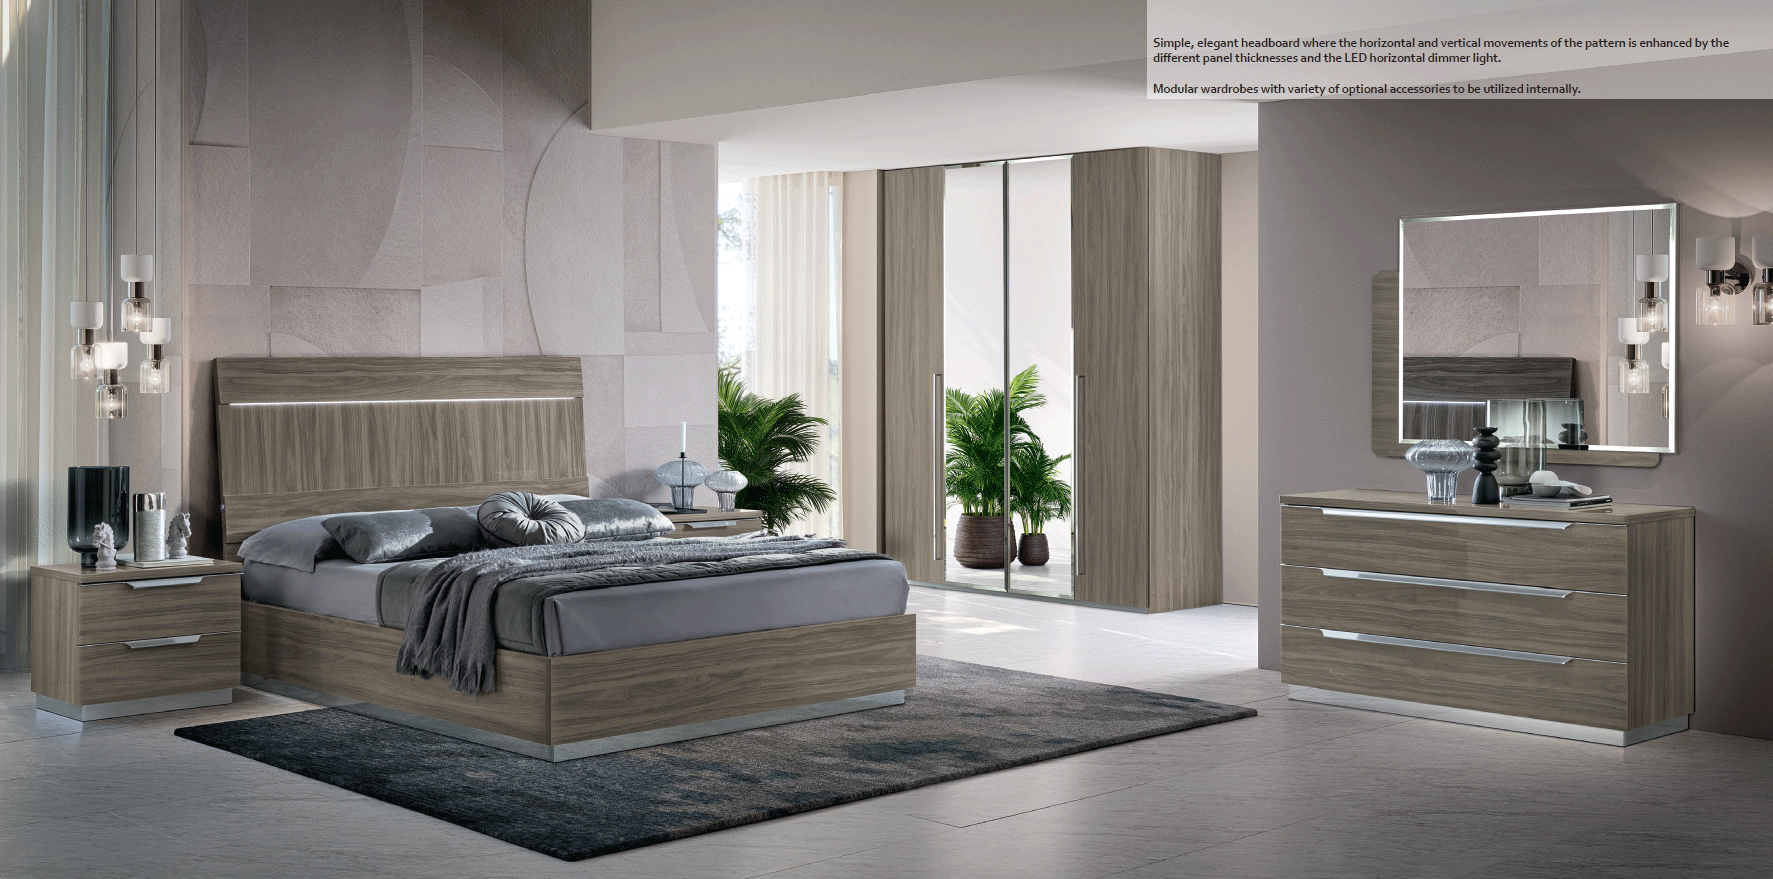 Bedroom Furniture Mirrors Kroma Bedroom GREY Additional Items